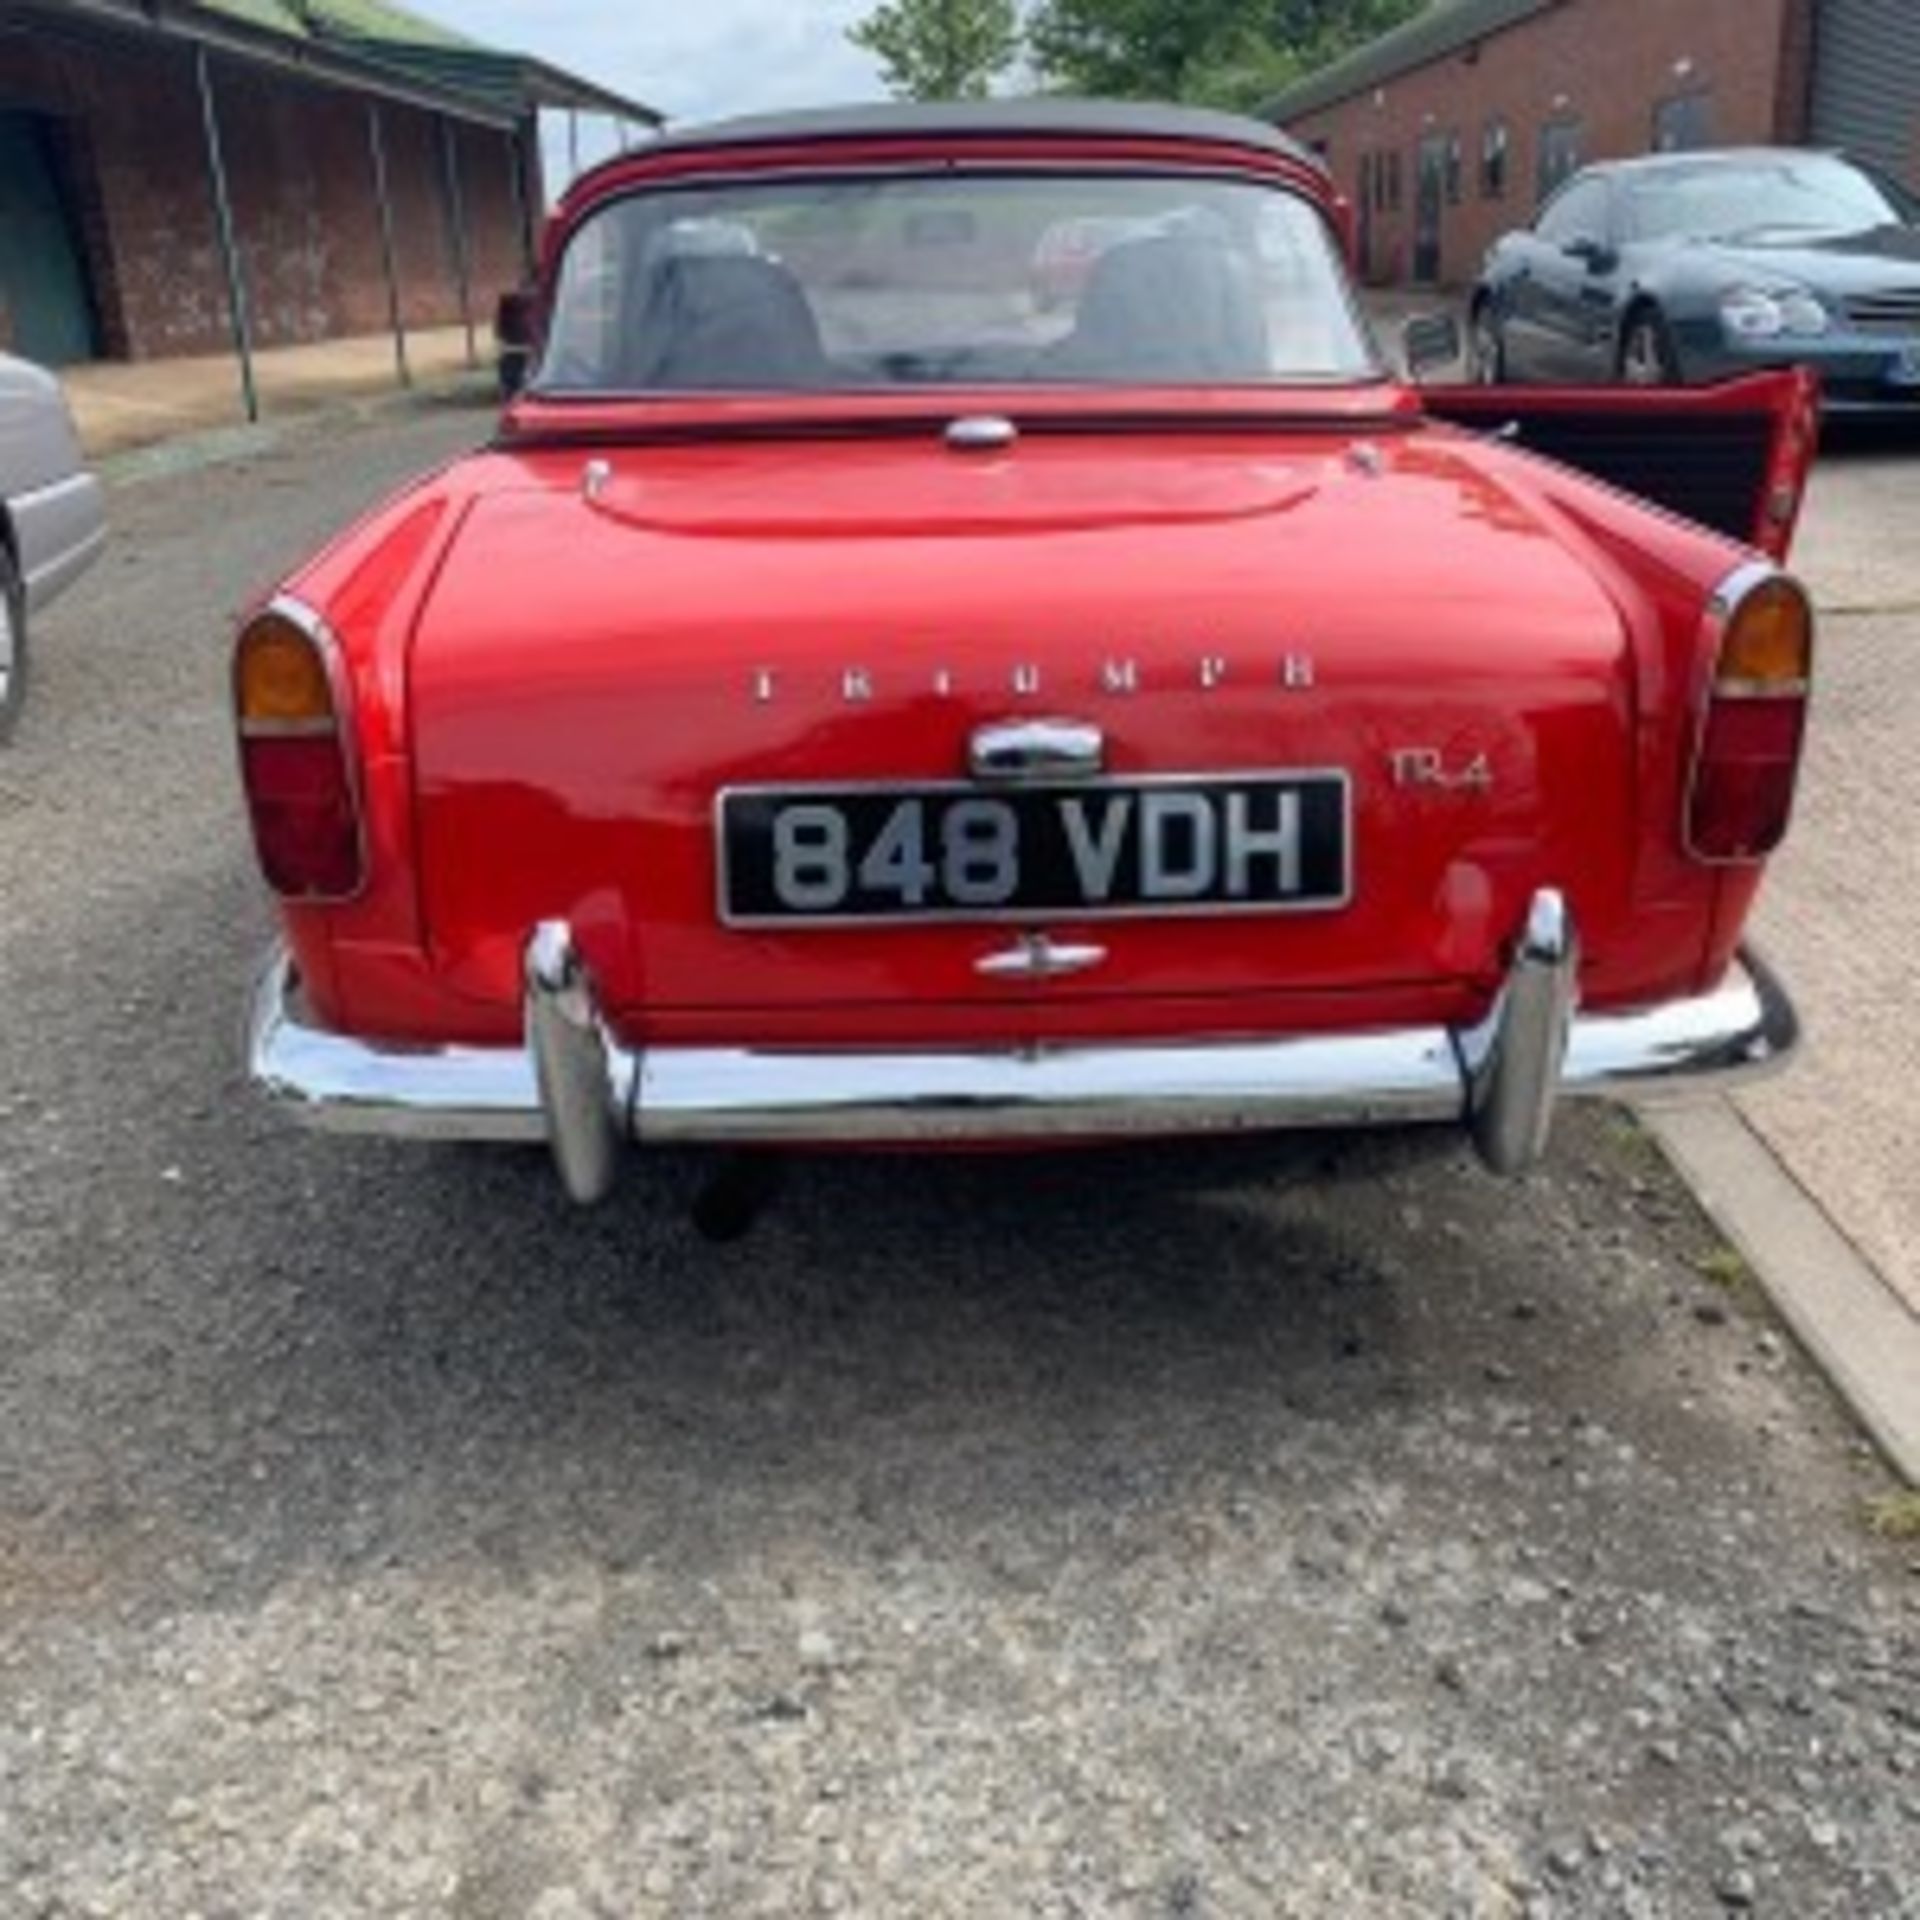 1963 TRIUMPH TR4 Registration Number: 848 VDH  Chassis Number: TBA Recorded Mileage: c.17,000 - Image 6 of 6